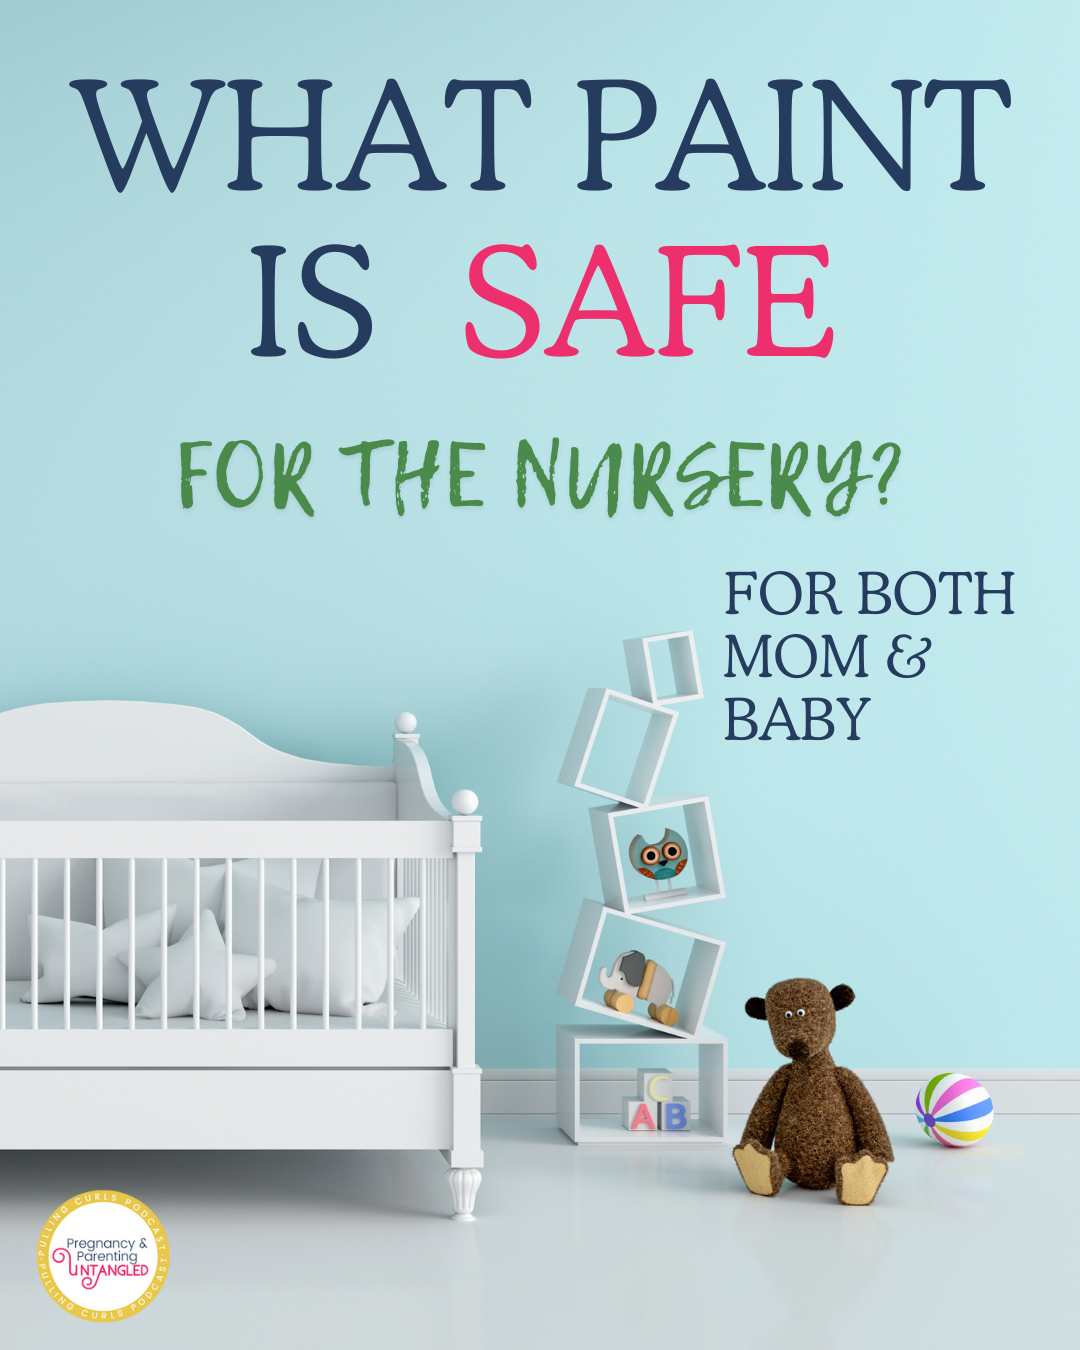 "5 Things to Avoid During Pregnancy: Paint and Lead Paint - Expert Tips for a Healthy Pregnancy" – Learn from a chemistry Ph.D. and the mommy behind evidencebasedmommy.com. Discover the importance of avoiding certain types of paint during pregnancy, including tips on low VOC paint and how to handle lead paint in older homes. Find out how to minimize your exposure to harmful chemicals and create a safe environment. #pregnancytips #avoidduringpregnancy #healthypregnancy #nurserydecor #safepainting via @pullingcurls